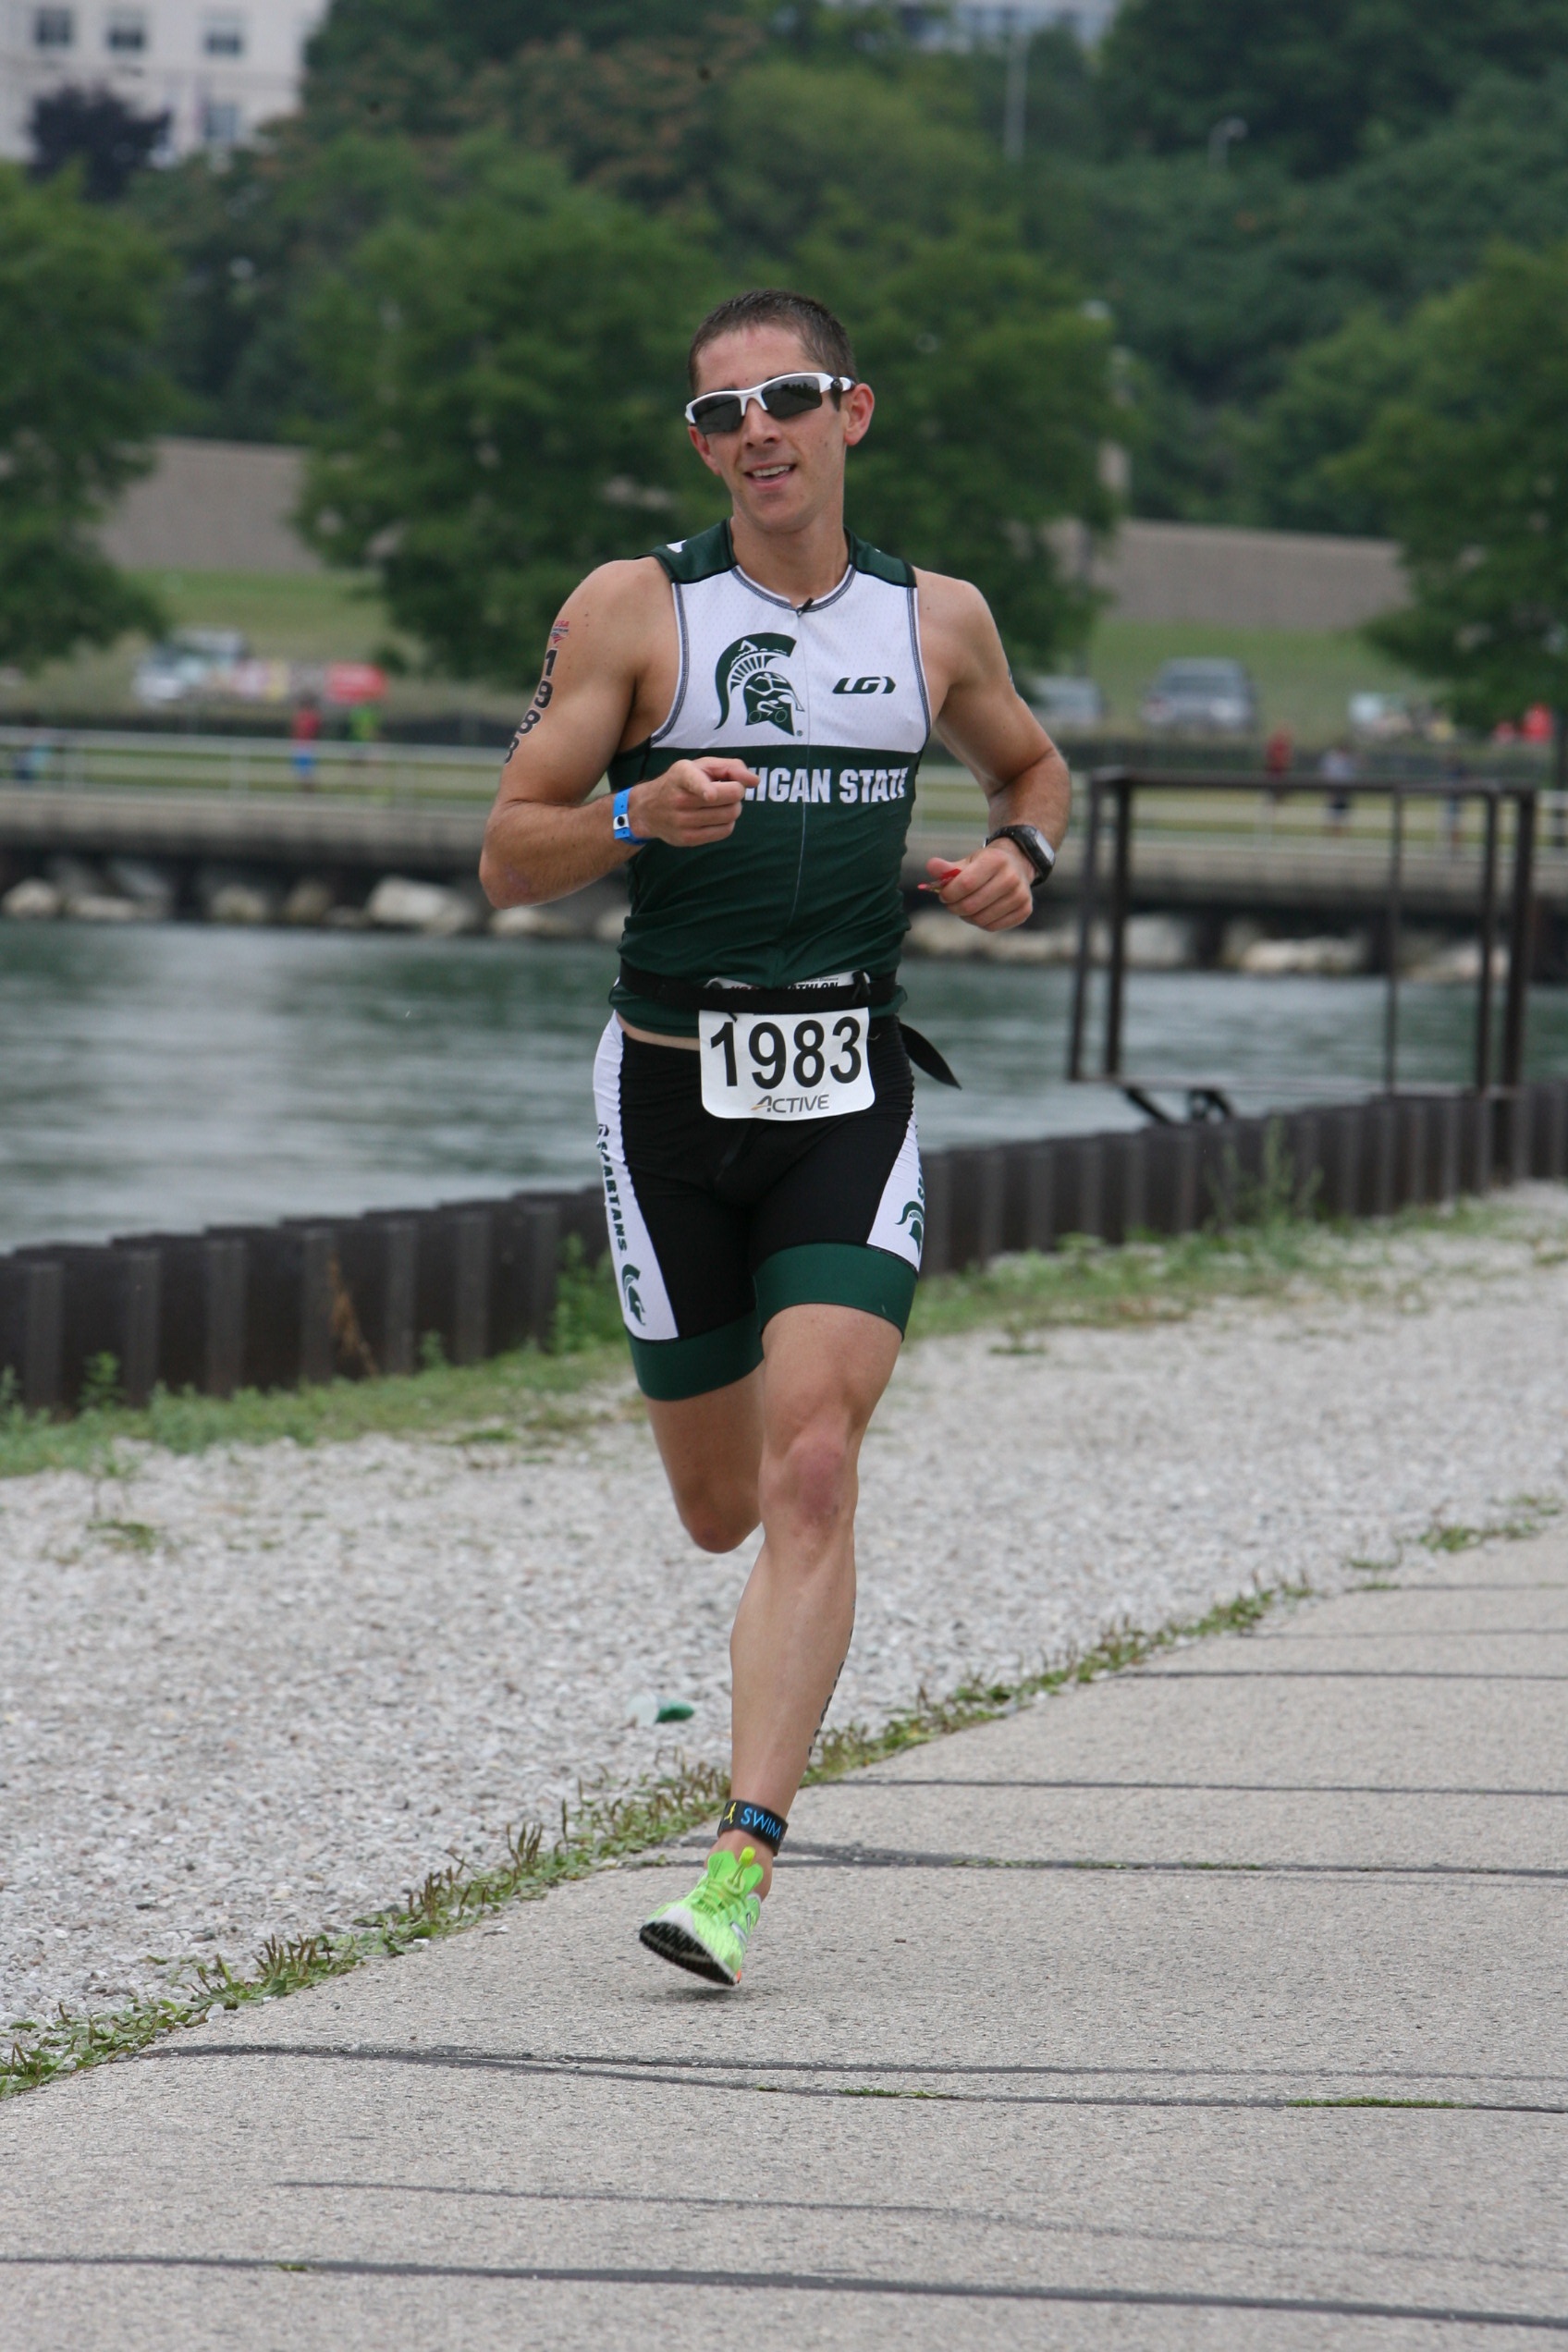 2015 USAT Olympic Distance Age Group National Championship — Todd Buckingham